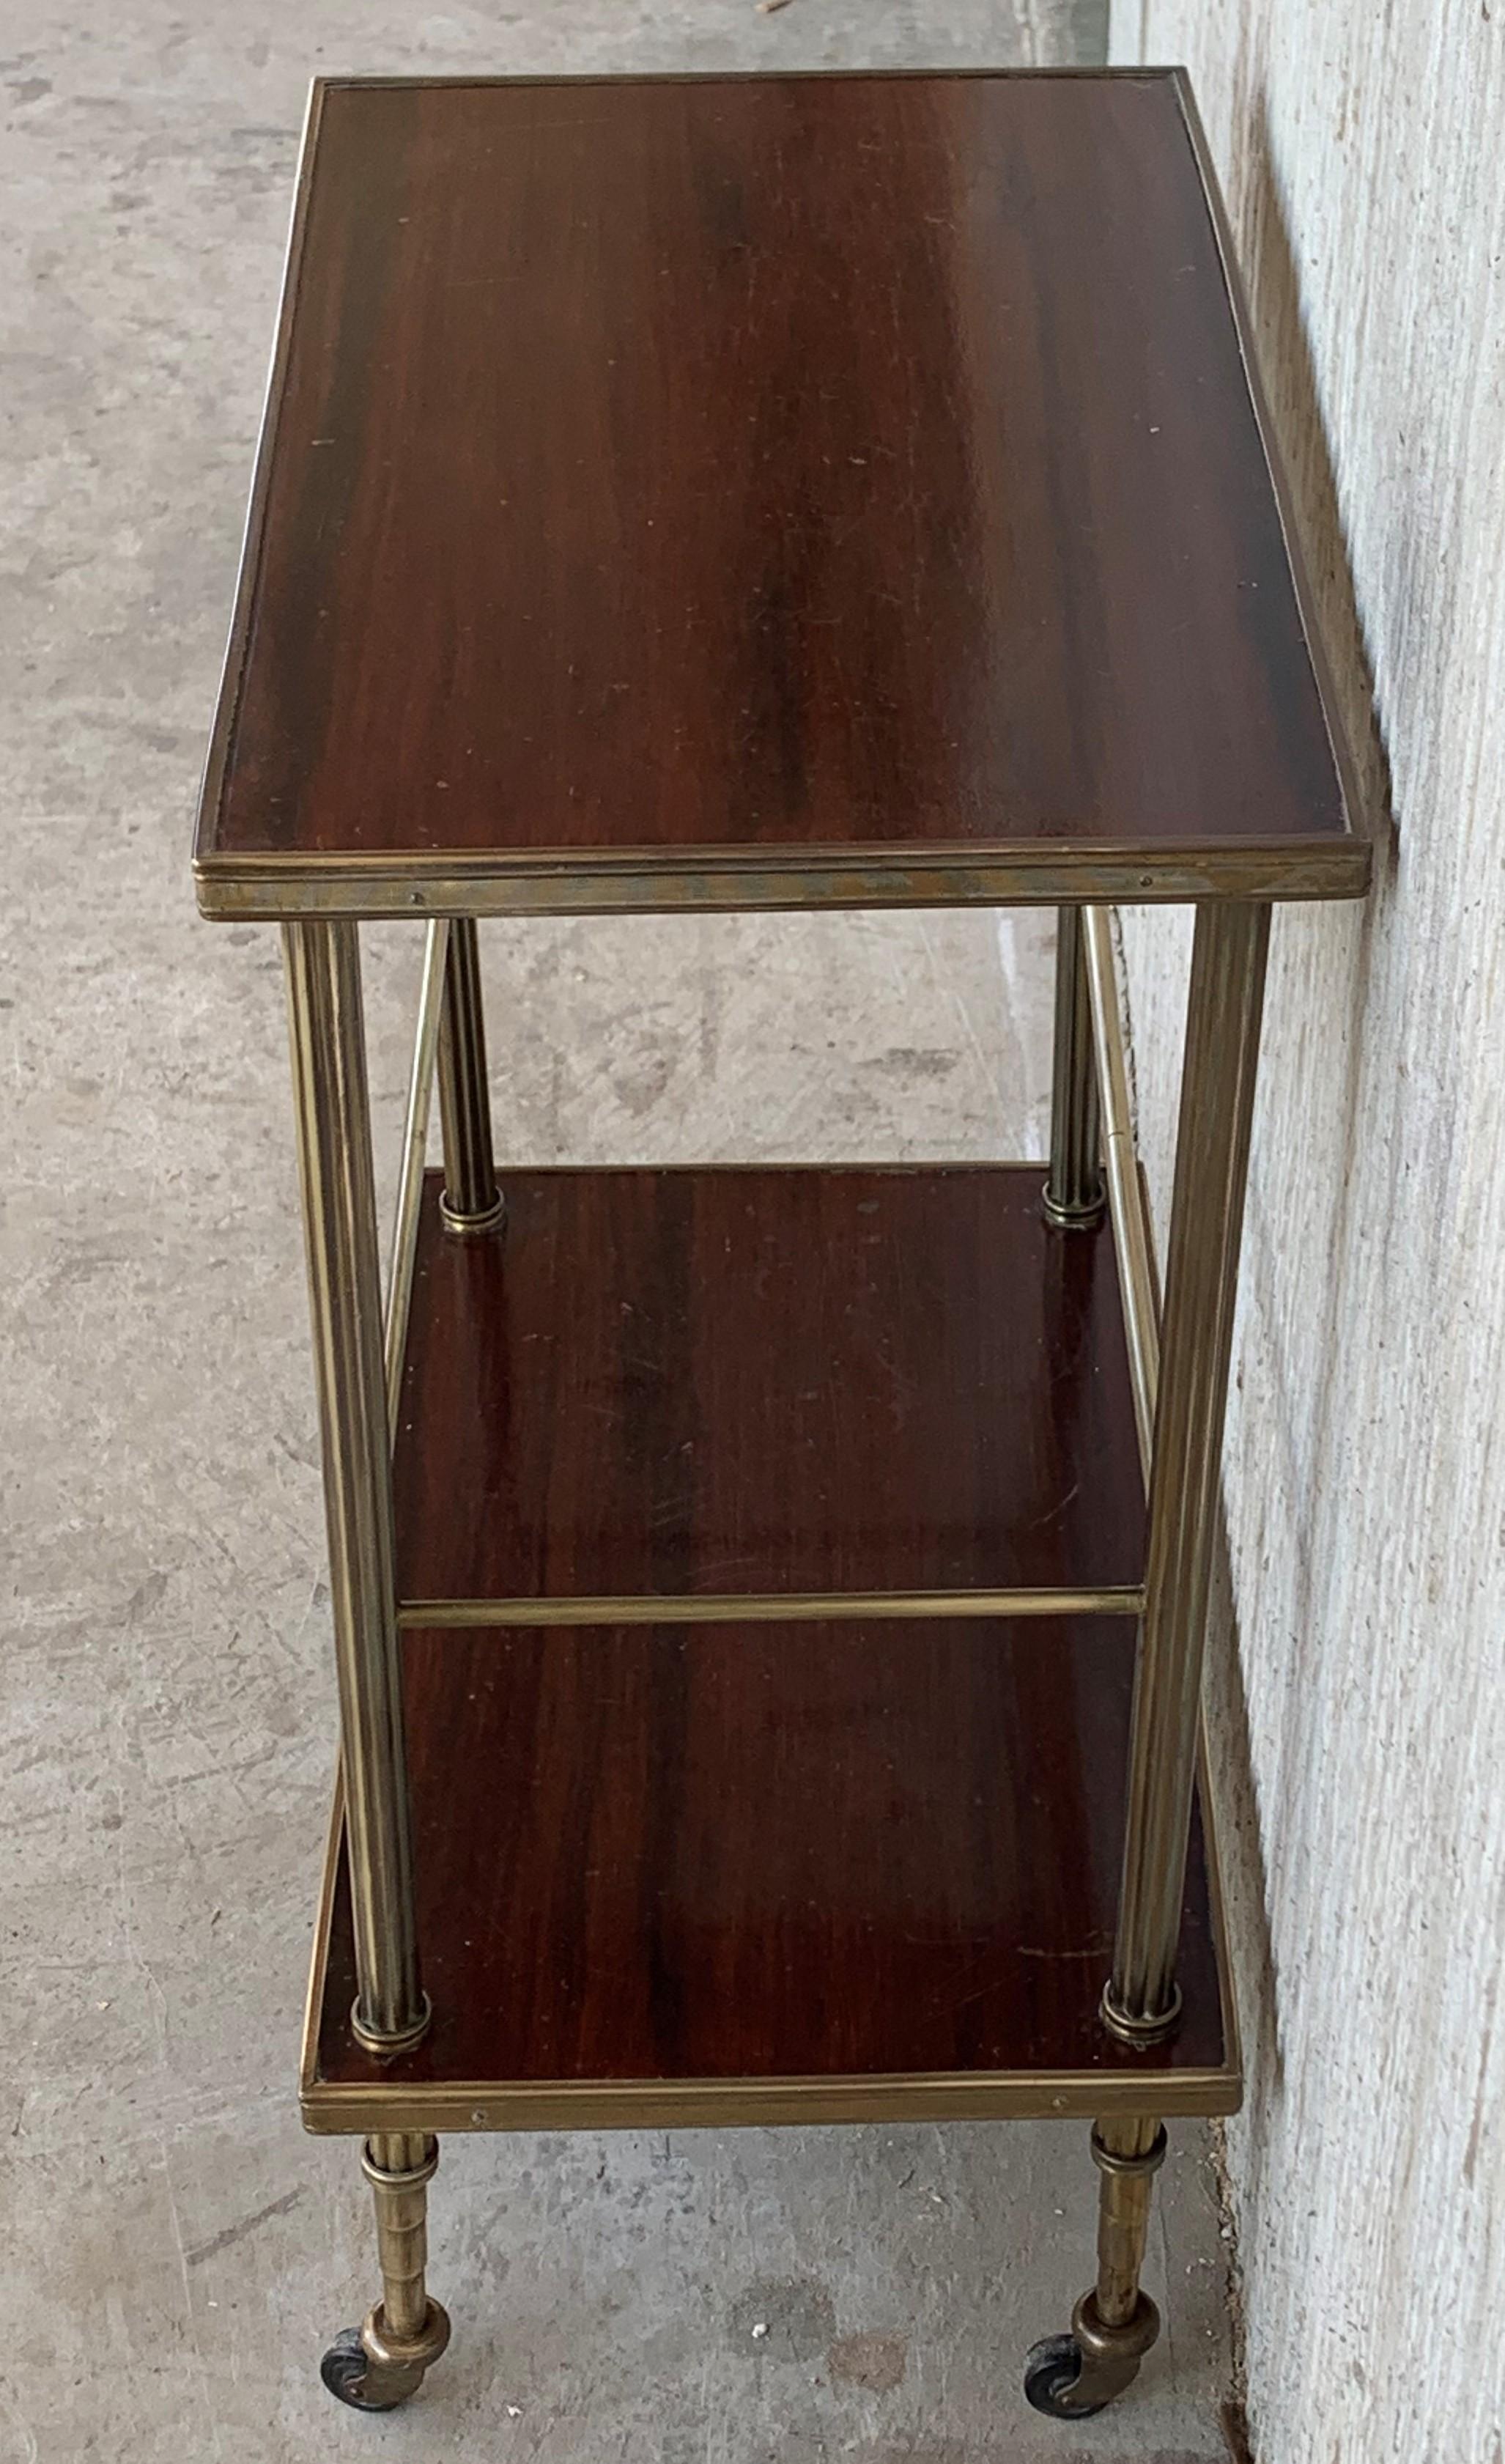 20th Century Mid-Century Modern Two-Tier Brass and Mahogany Veneer Side Table with Wheels